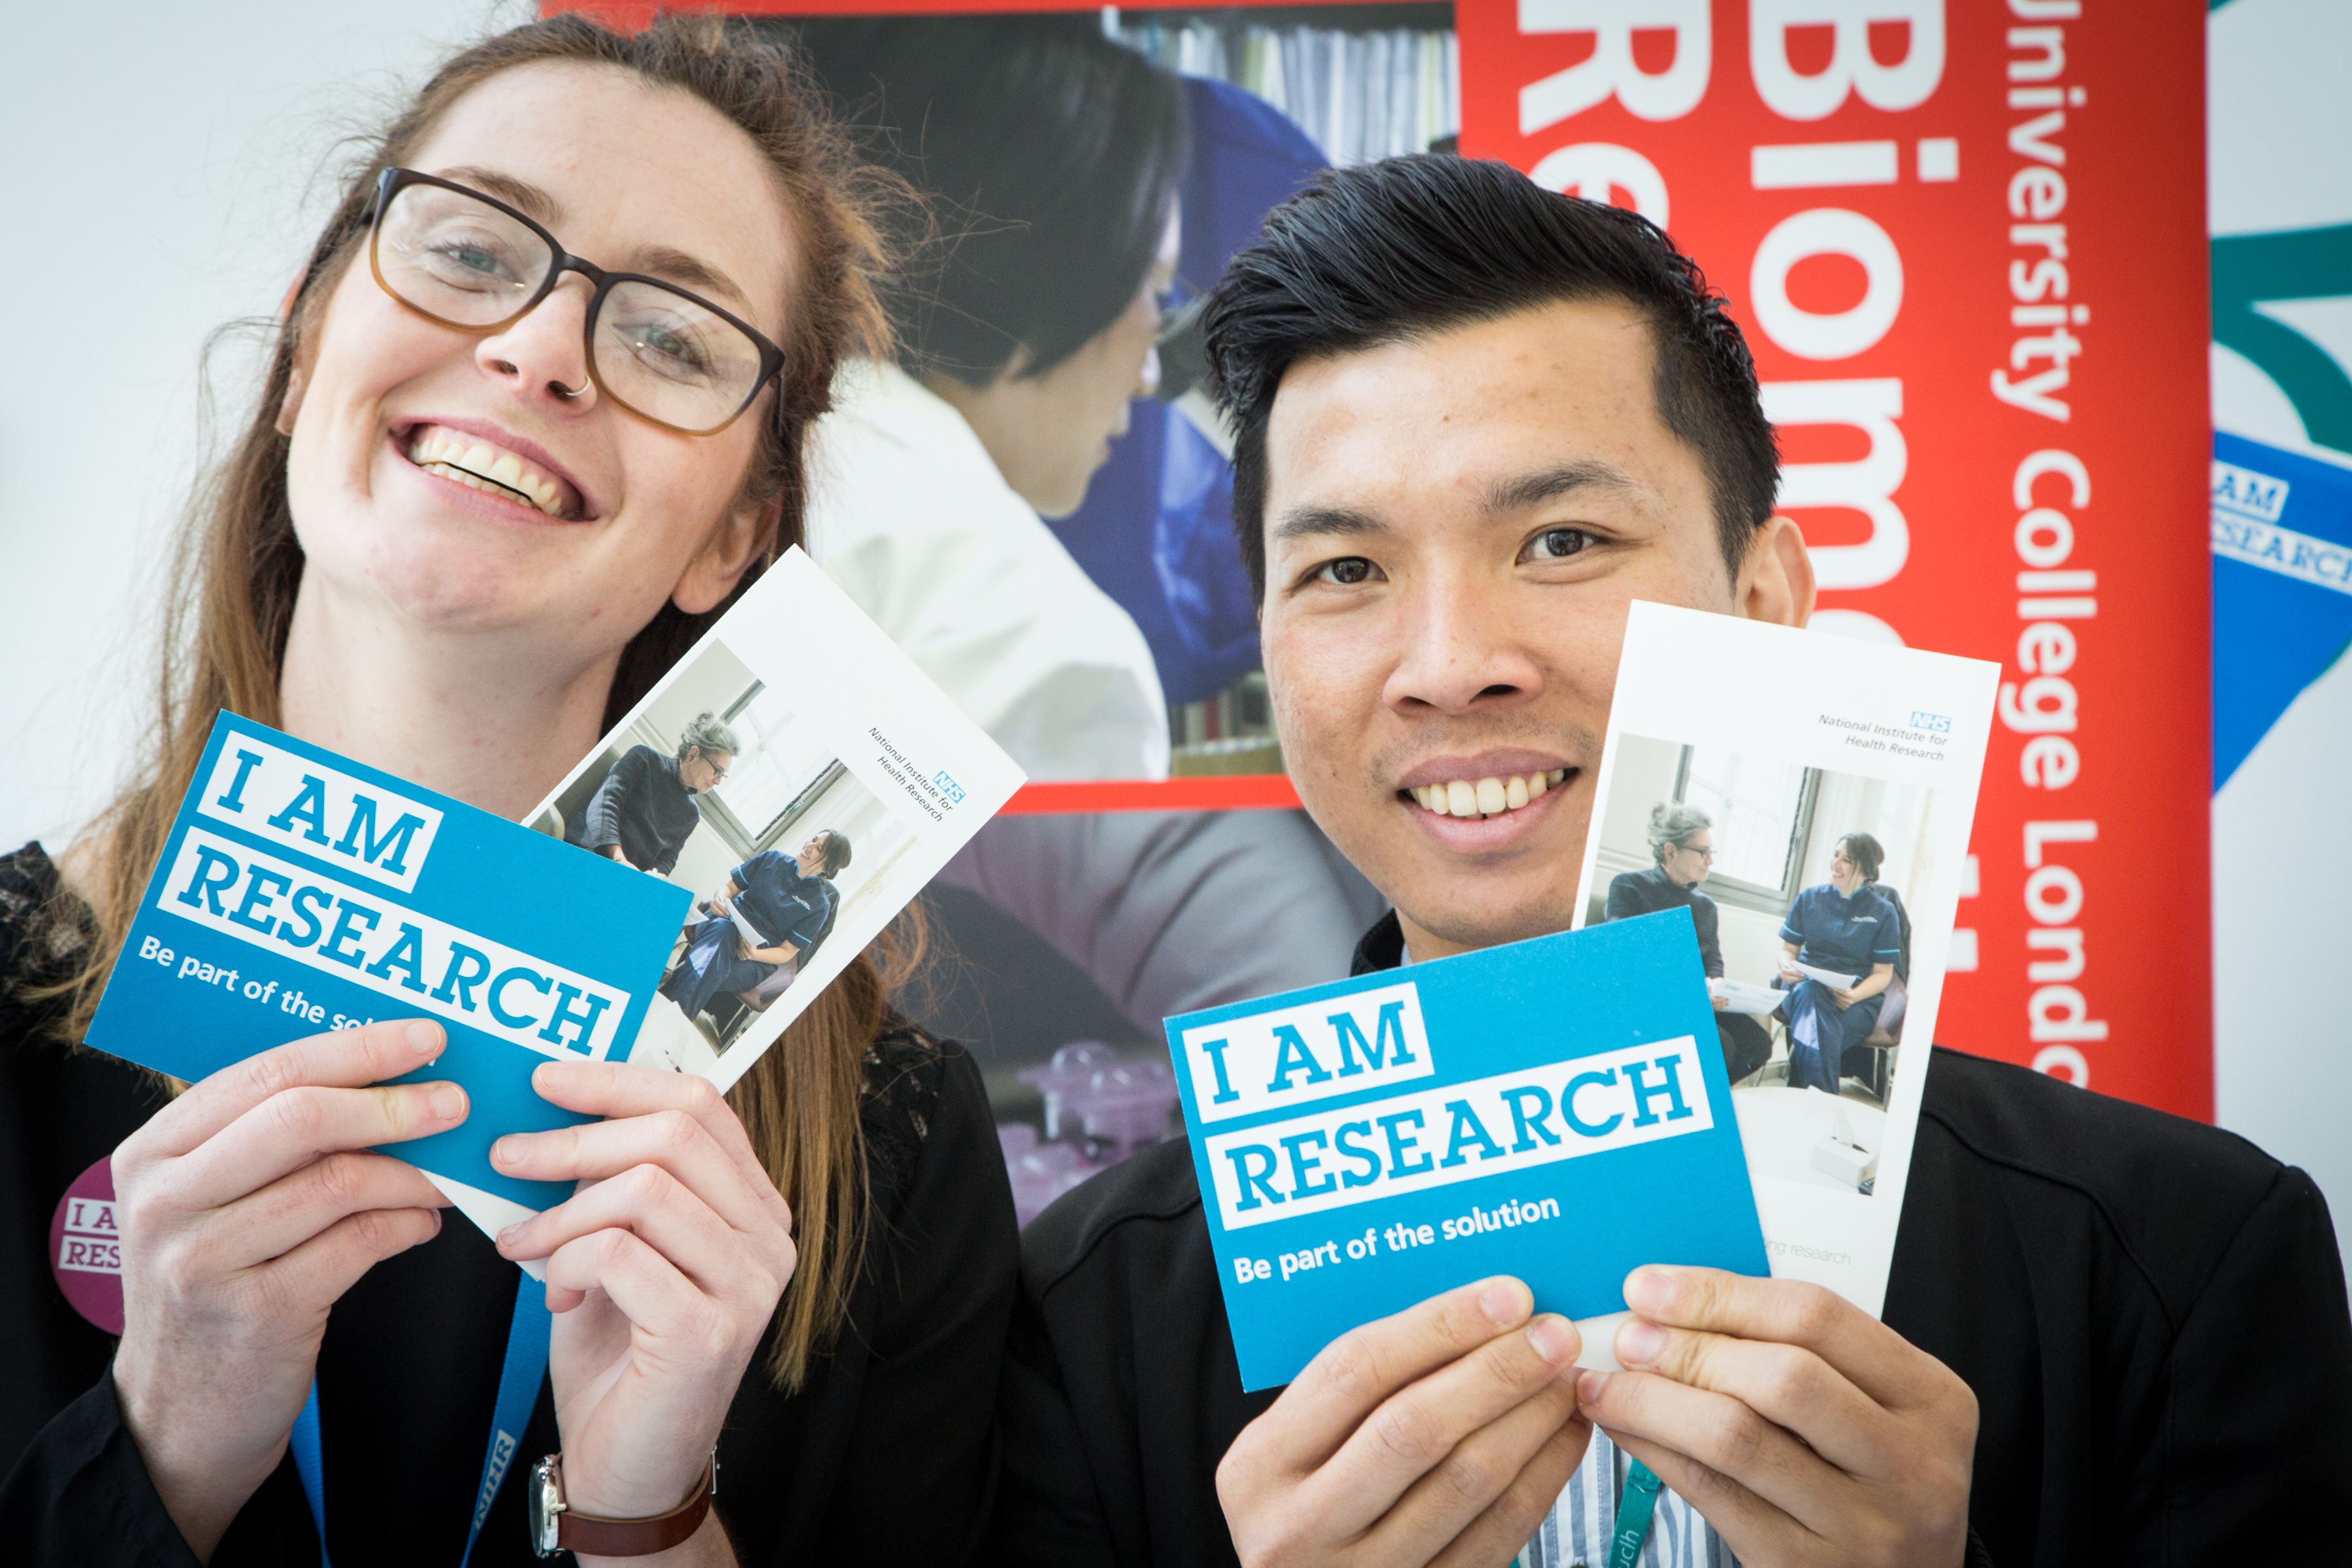 Man and woman stood together holding research leaflets